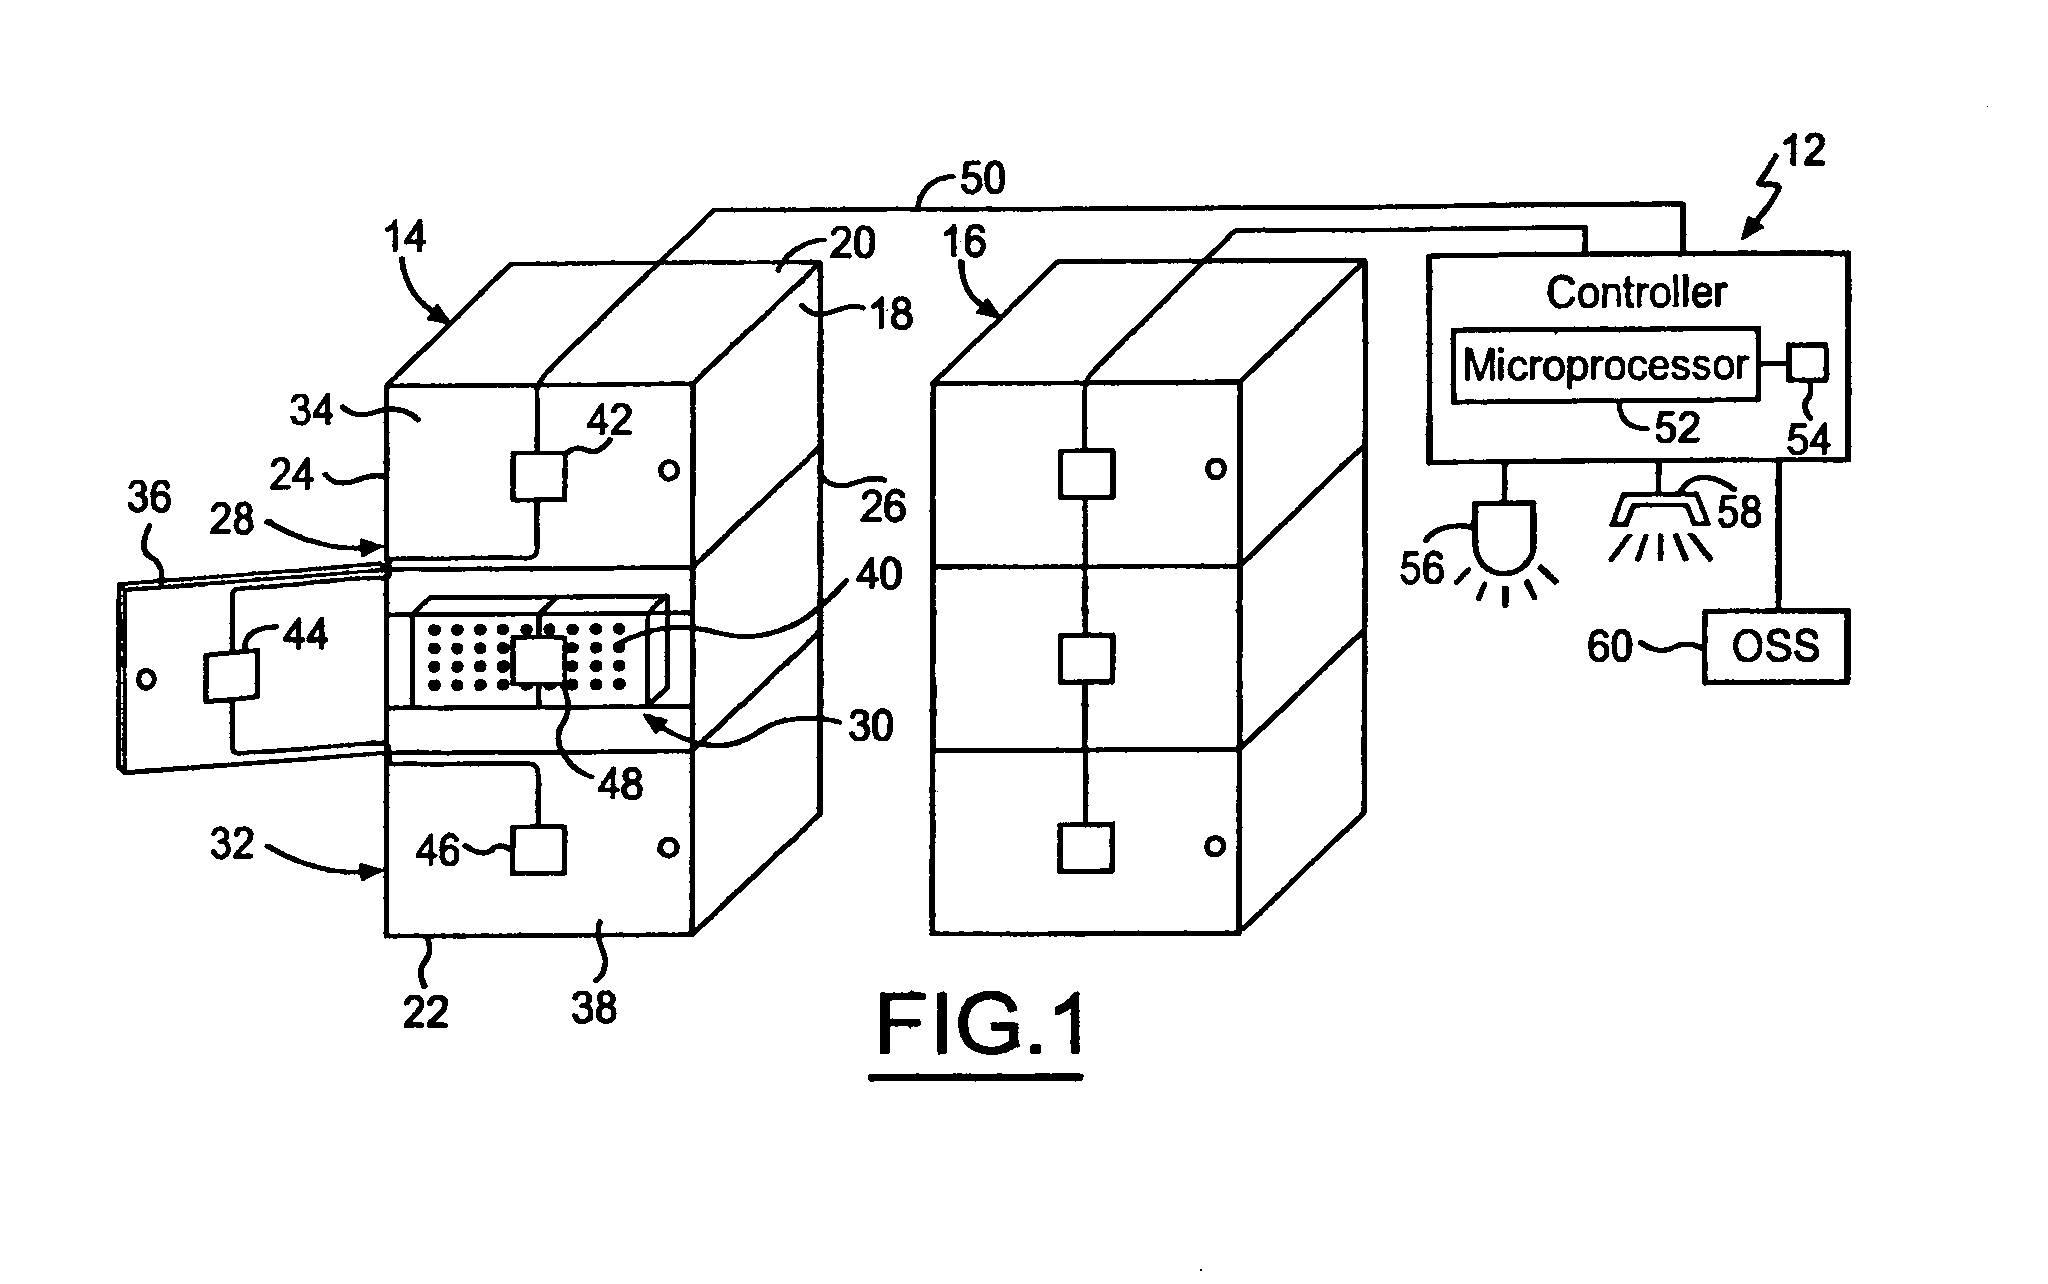 Fiber distribution frame arrangement having a centralized controller which universally controls and monitors access to fiber distribution frames